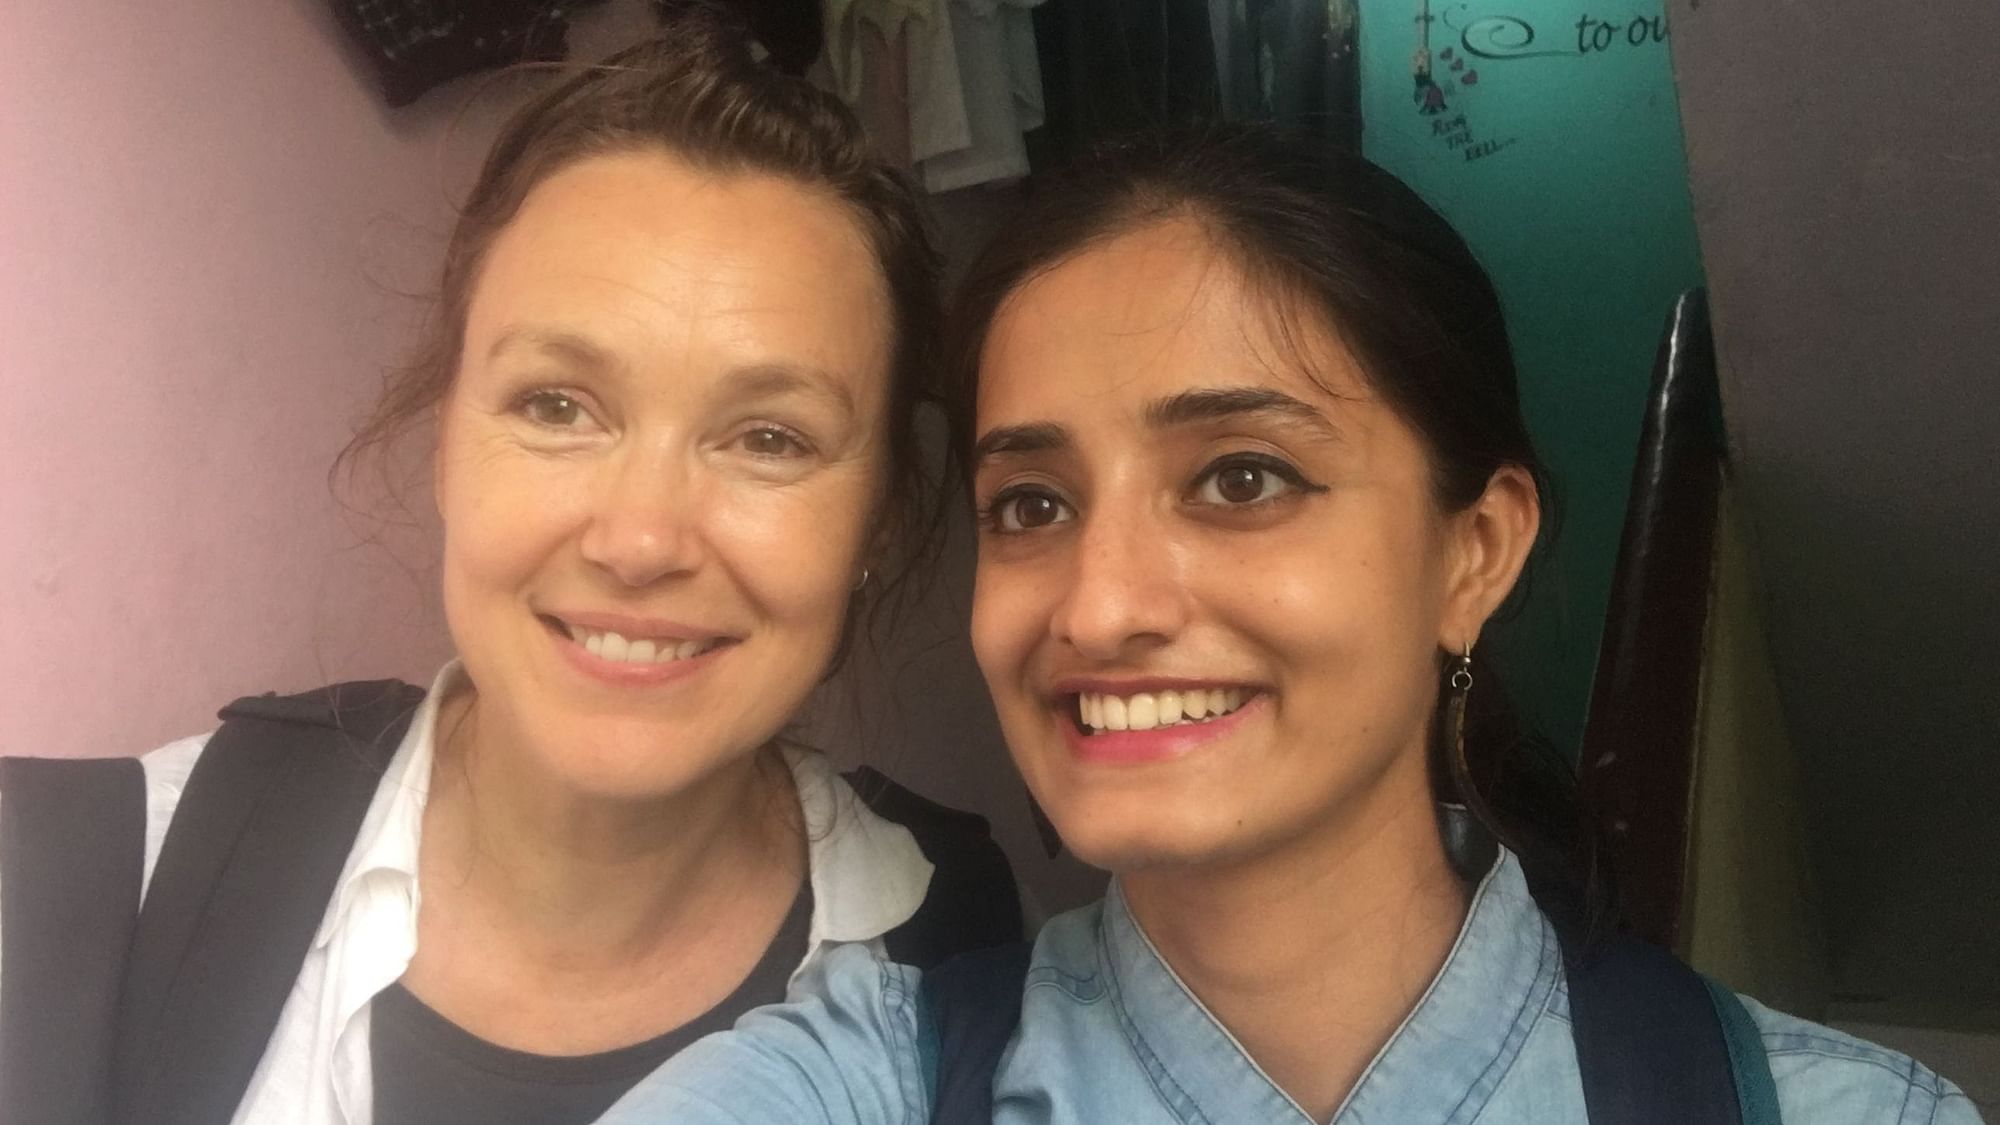 Cynthia Van Elk, a photographer from New York with The Quint’s correspondent Smitha TK.